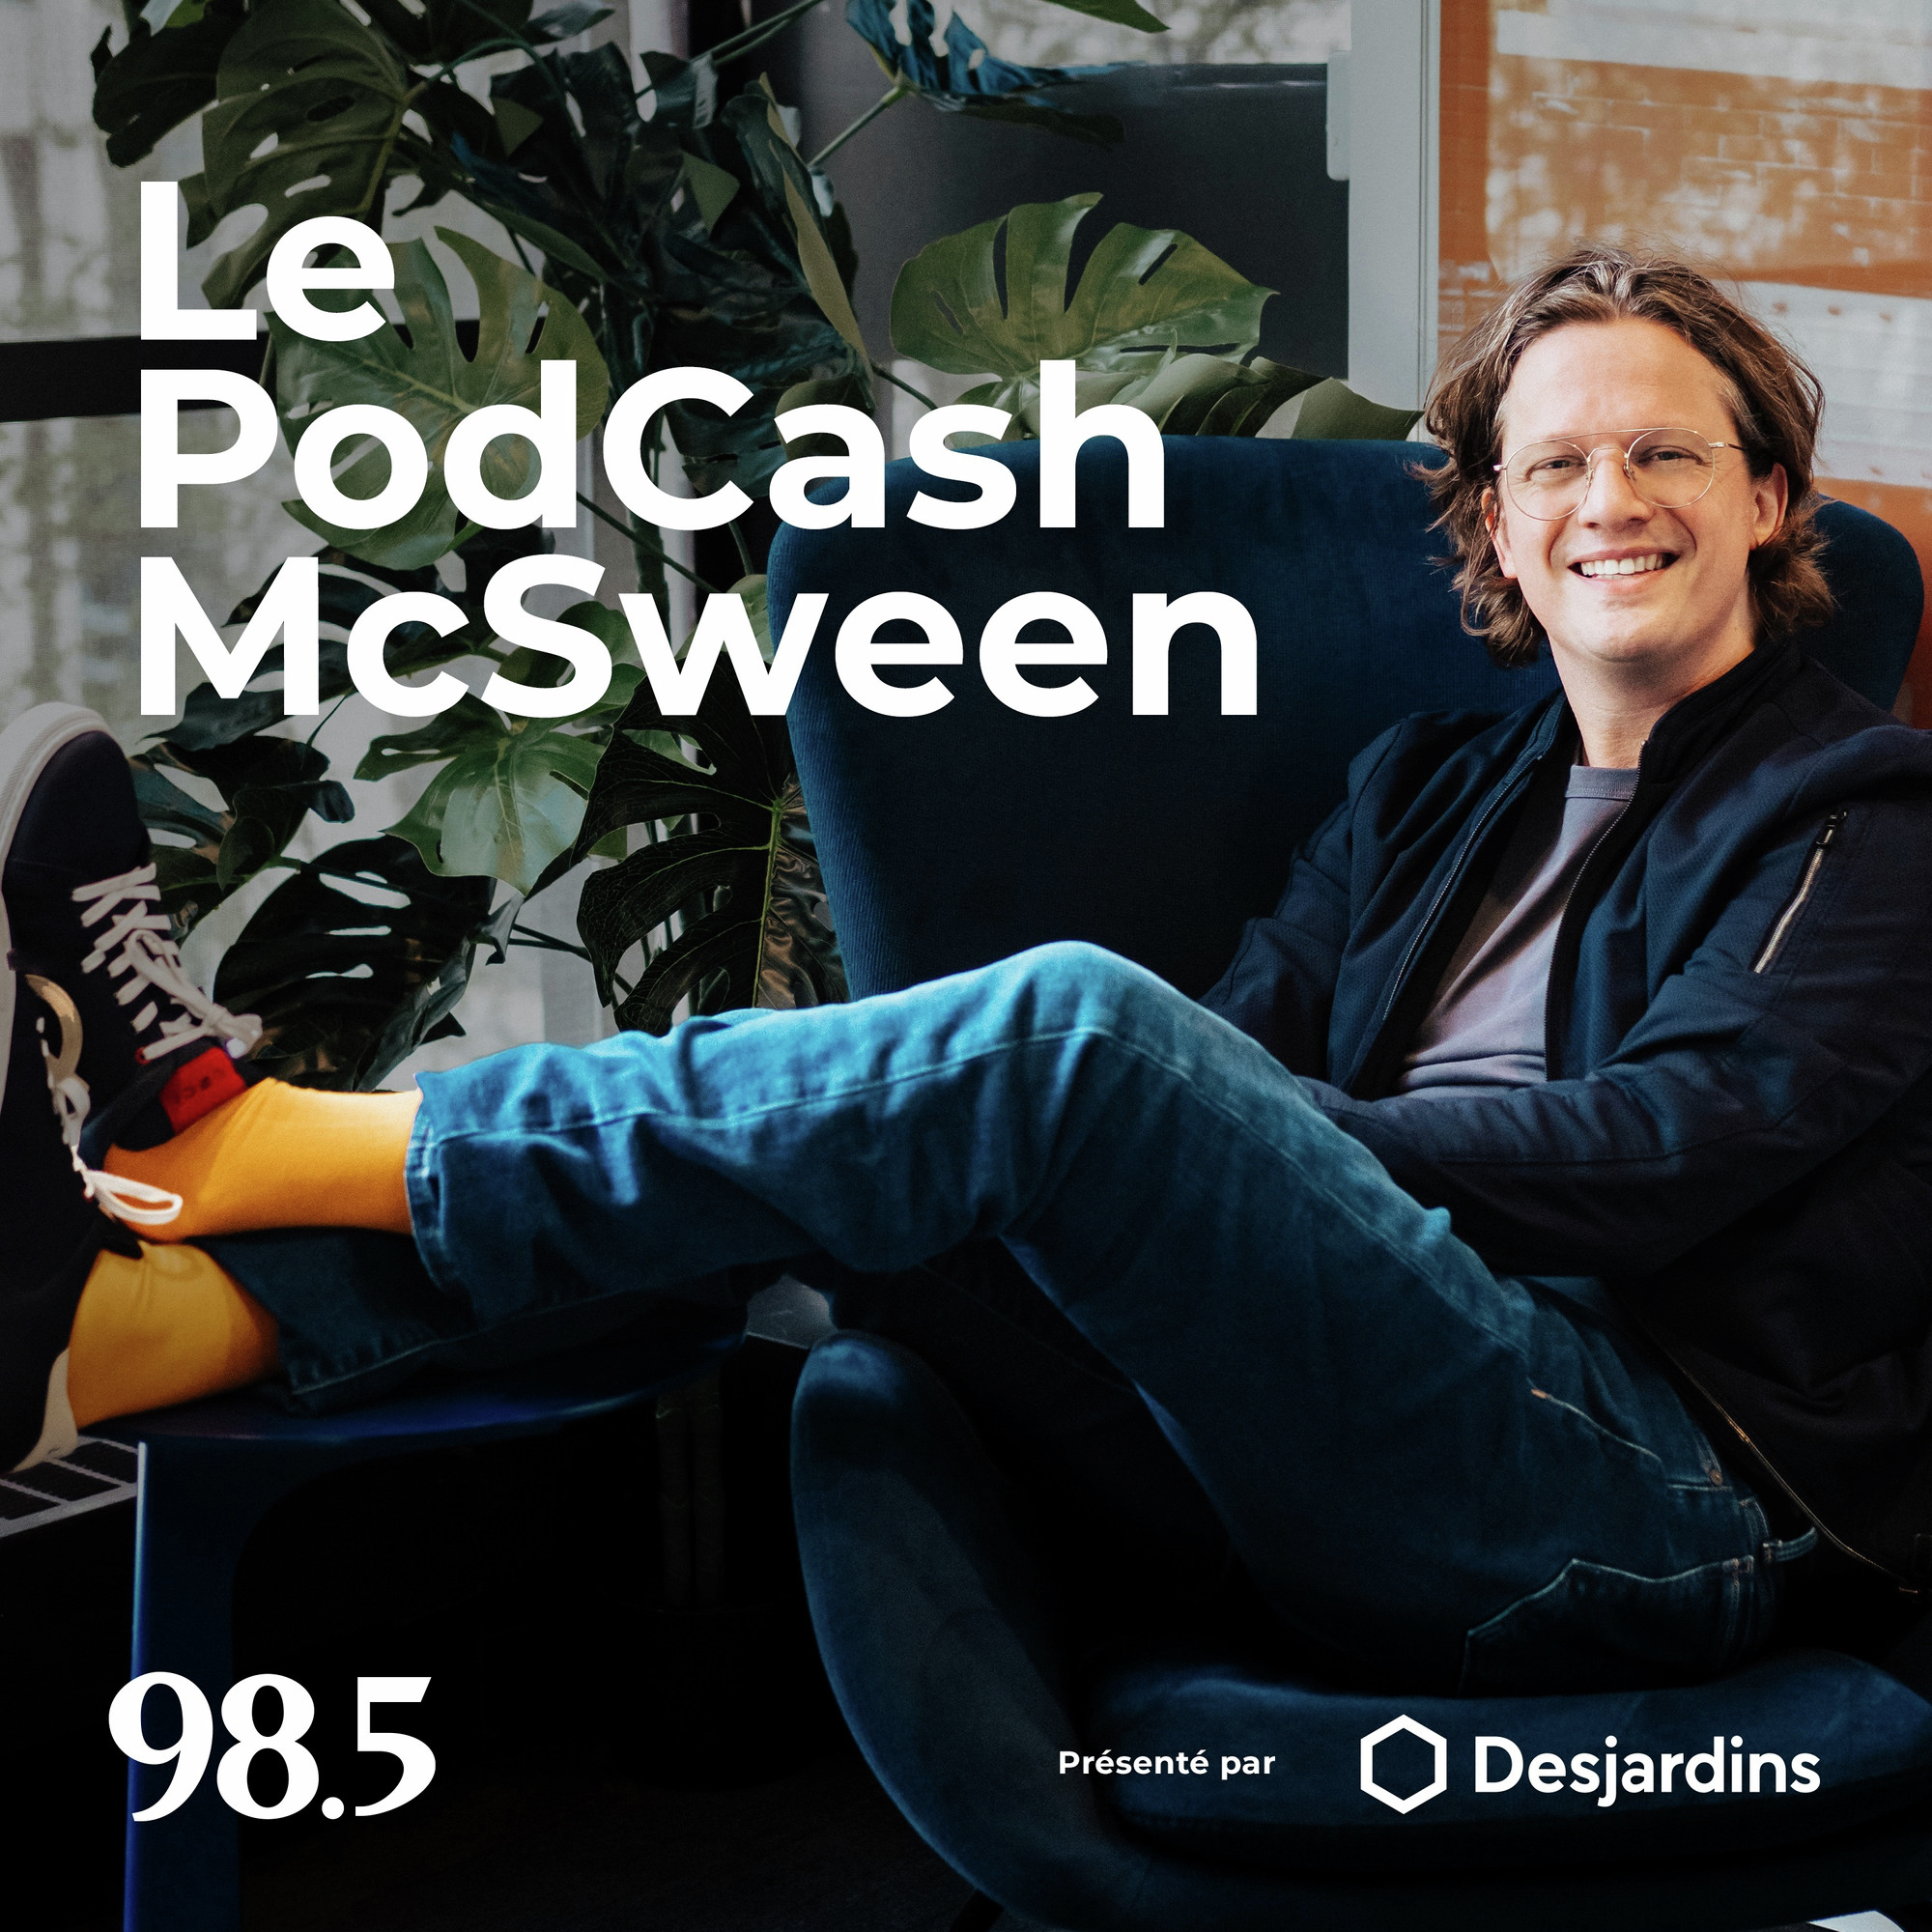 Le PodCash McSween